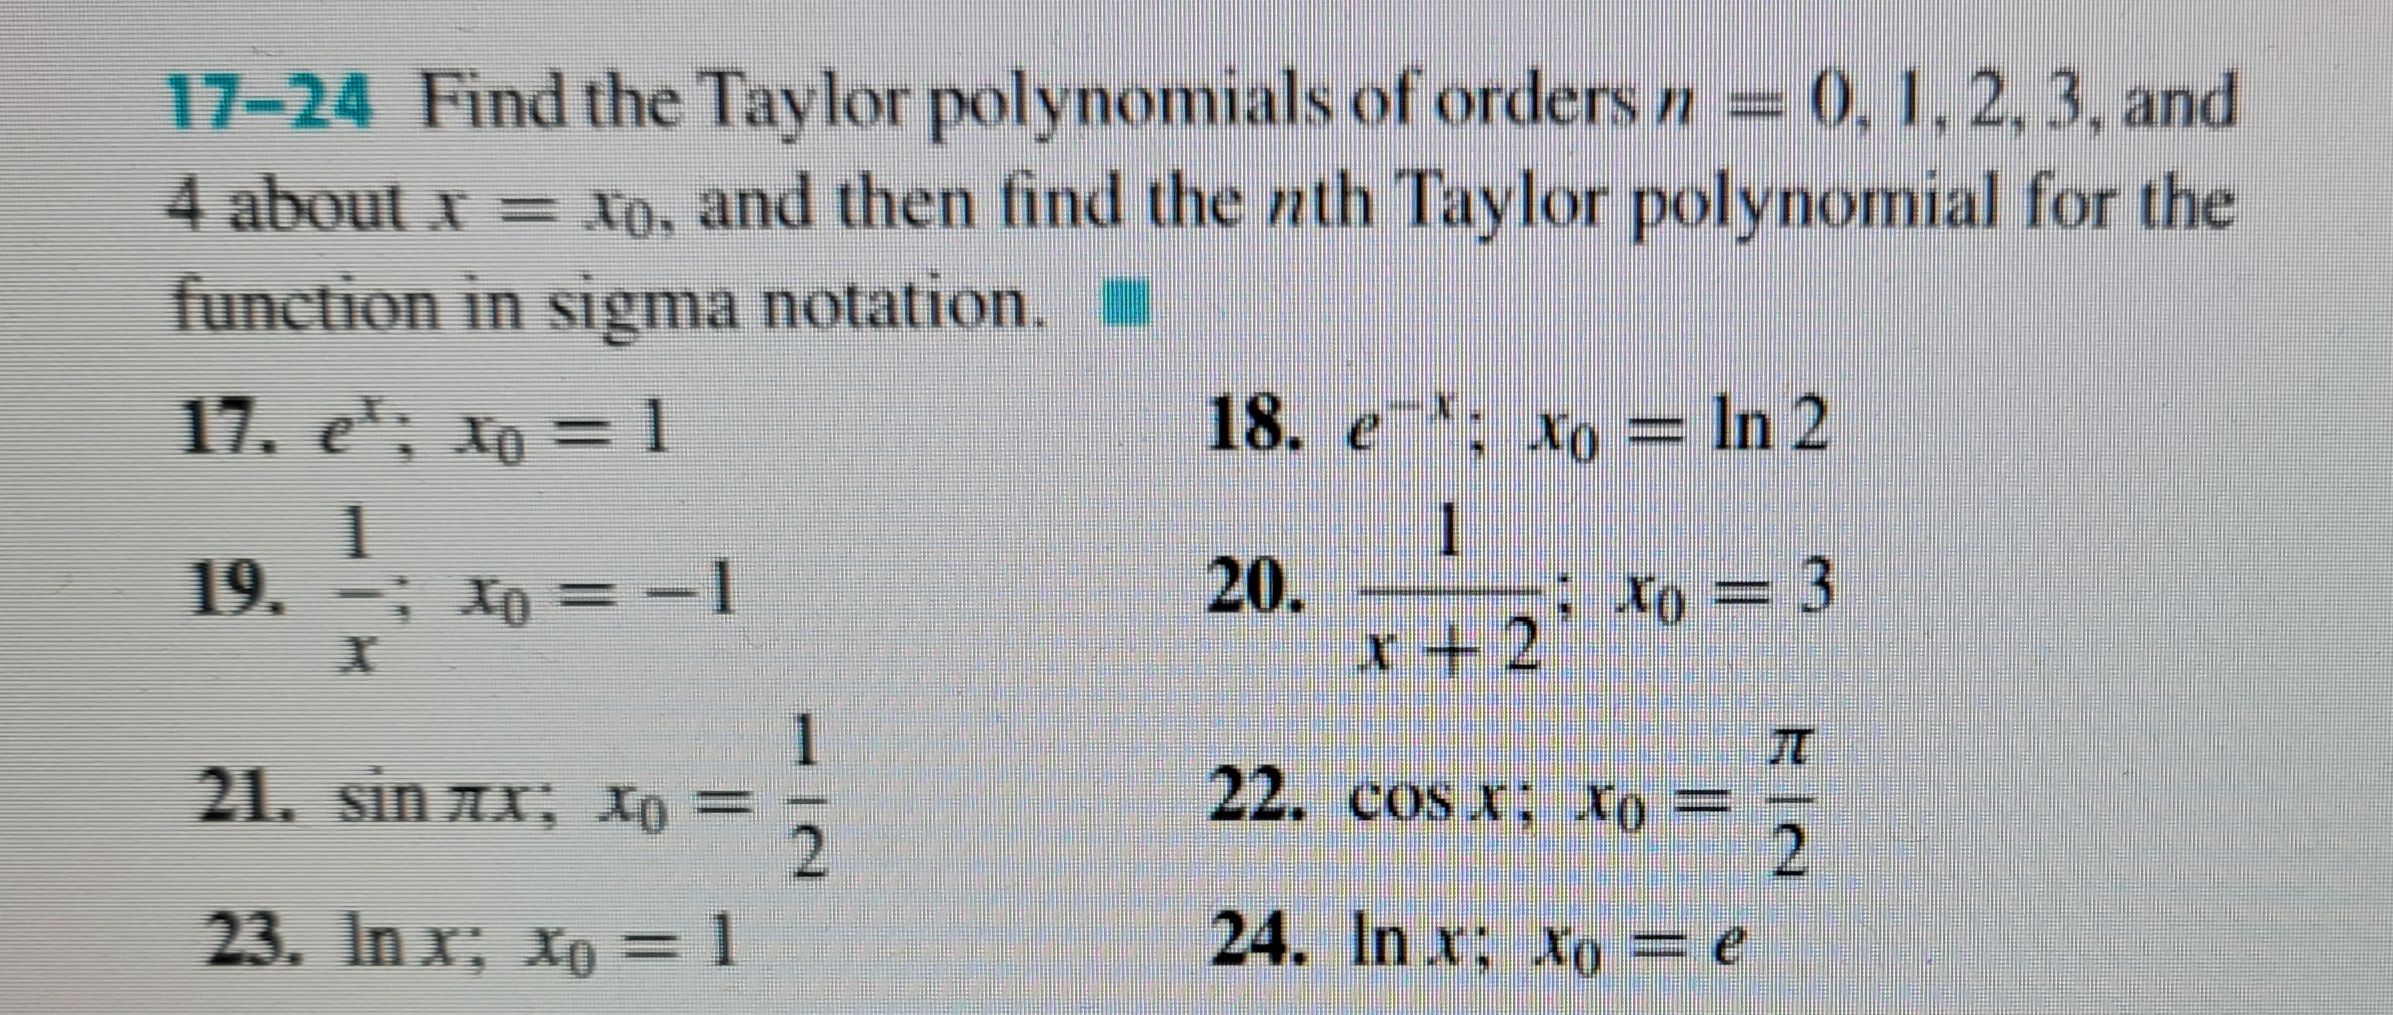 17-24 Find the Taylor polynomials of orders \( n =...